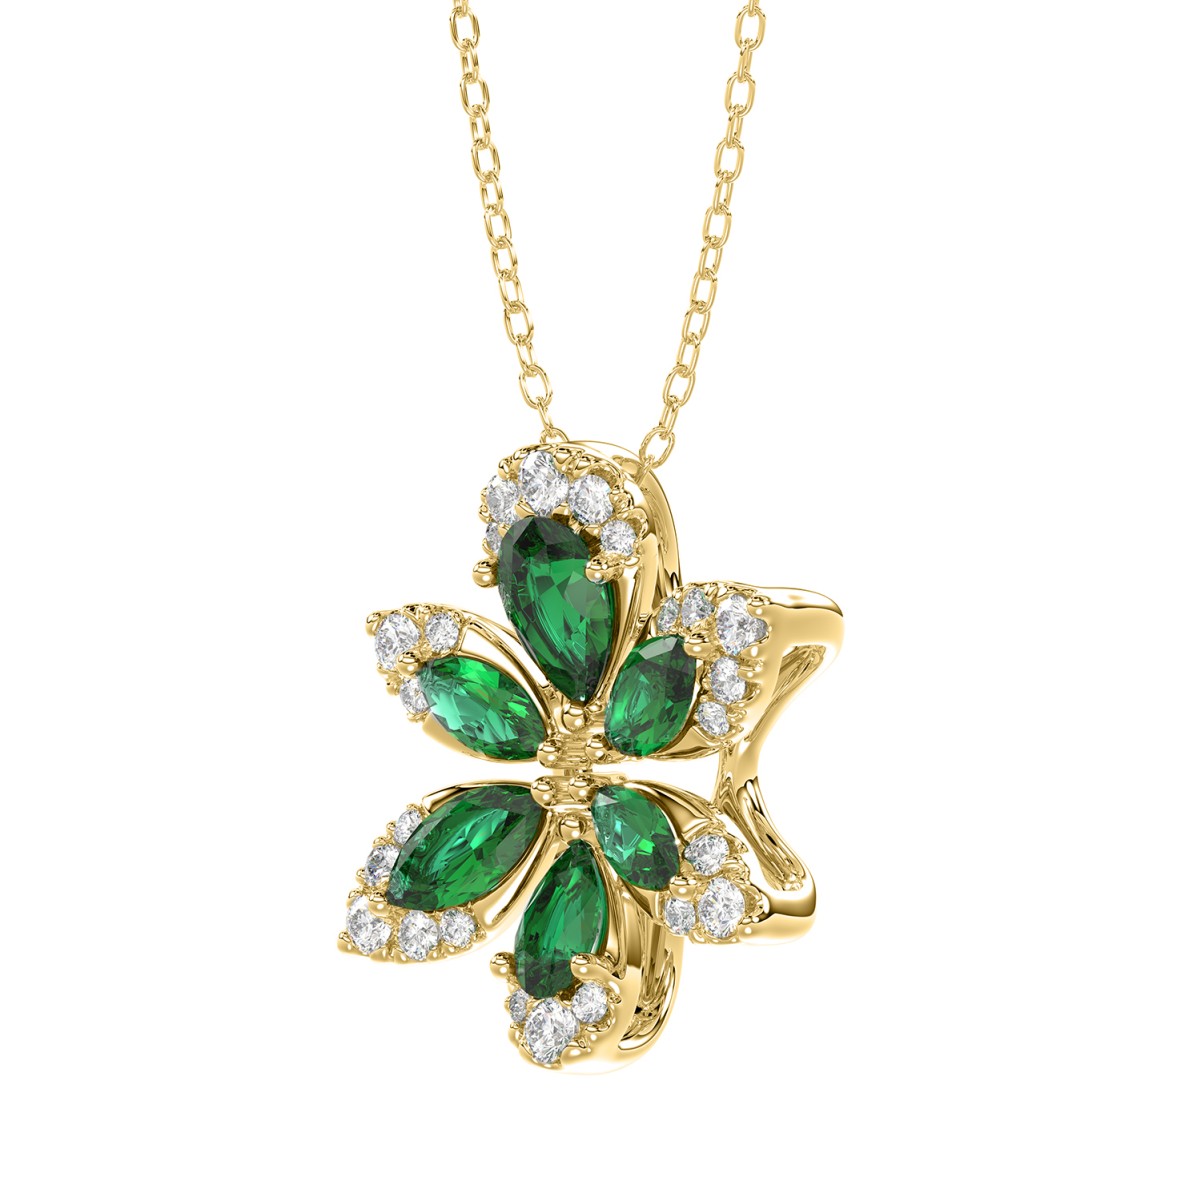 14K YELLOW GOLD 1 1/3CT ROUND/PEAR/MARQUISE DIAMOND LADIES PENDANT WITH CHAIN(COLOR STONE PEAR GREEN EMERALD/MARQUISE DIAMOND 1/6CT)